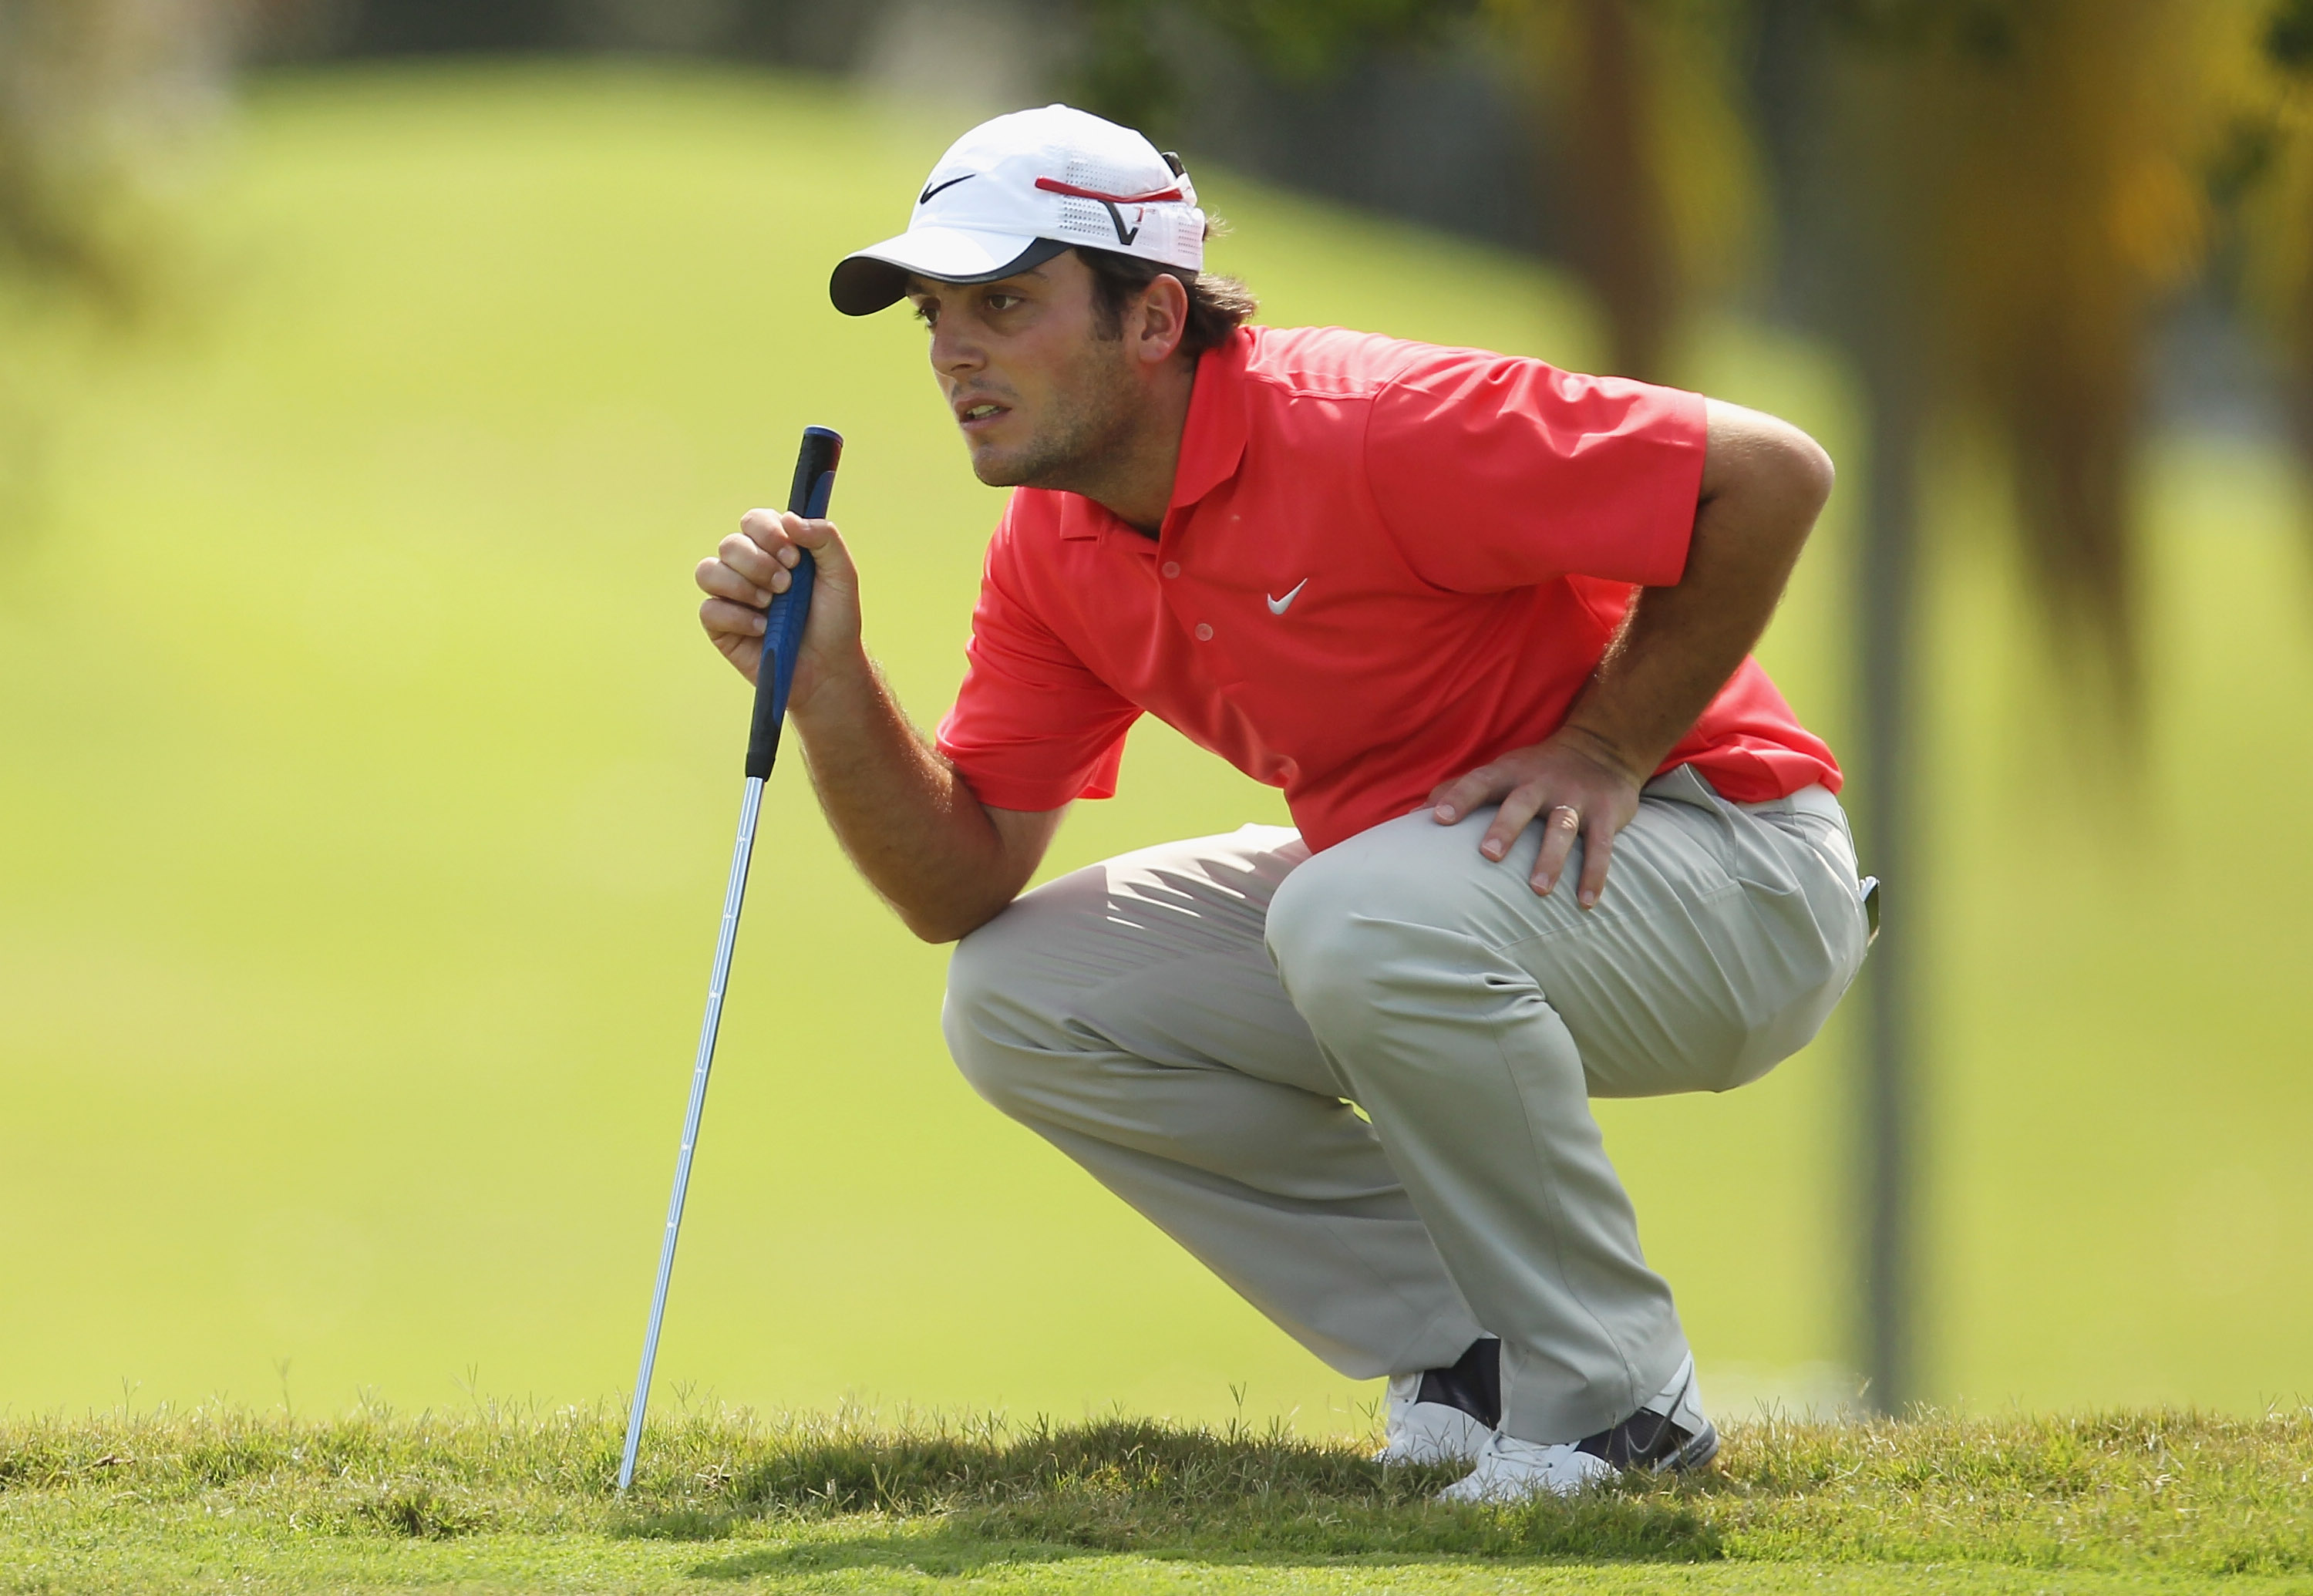 DORAL, FL - MARCH 12:  Francesco Molinari of Italy lines up a putt on the first hole during the third round of the 2011 WGC- Cadillac Championship at the TPC Blue Monster at the Doral Golf Resort and Spa on March 12, 2011 in Doral, Florida.  (Photo by Mik